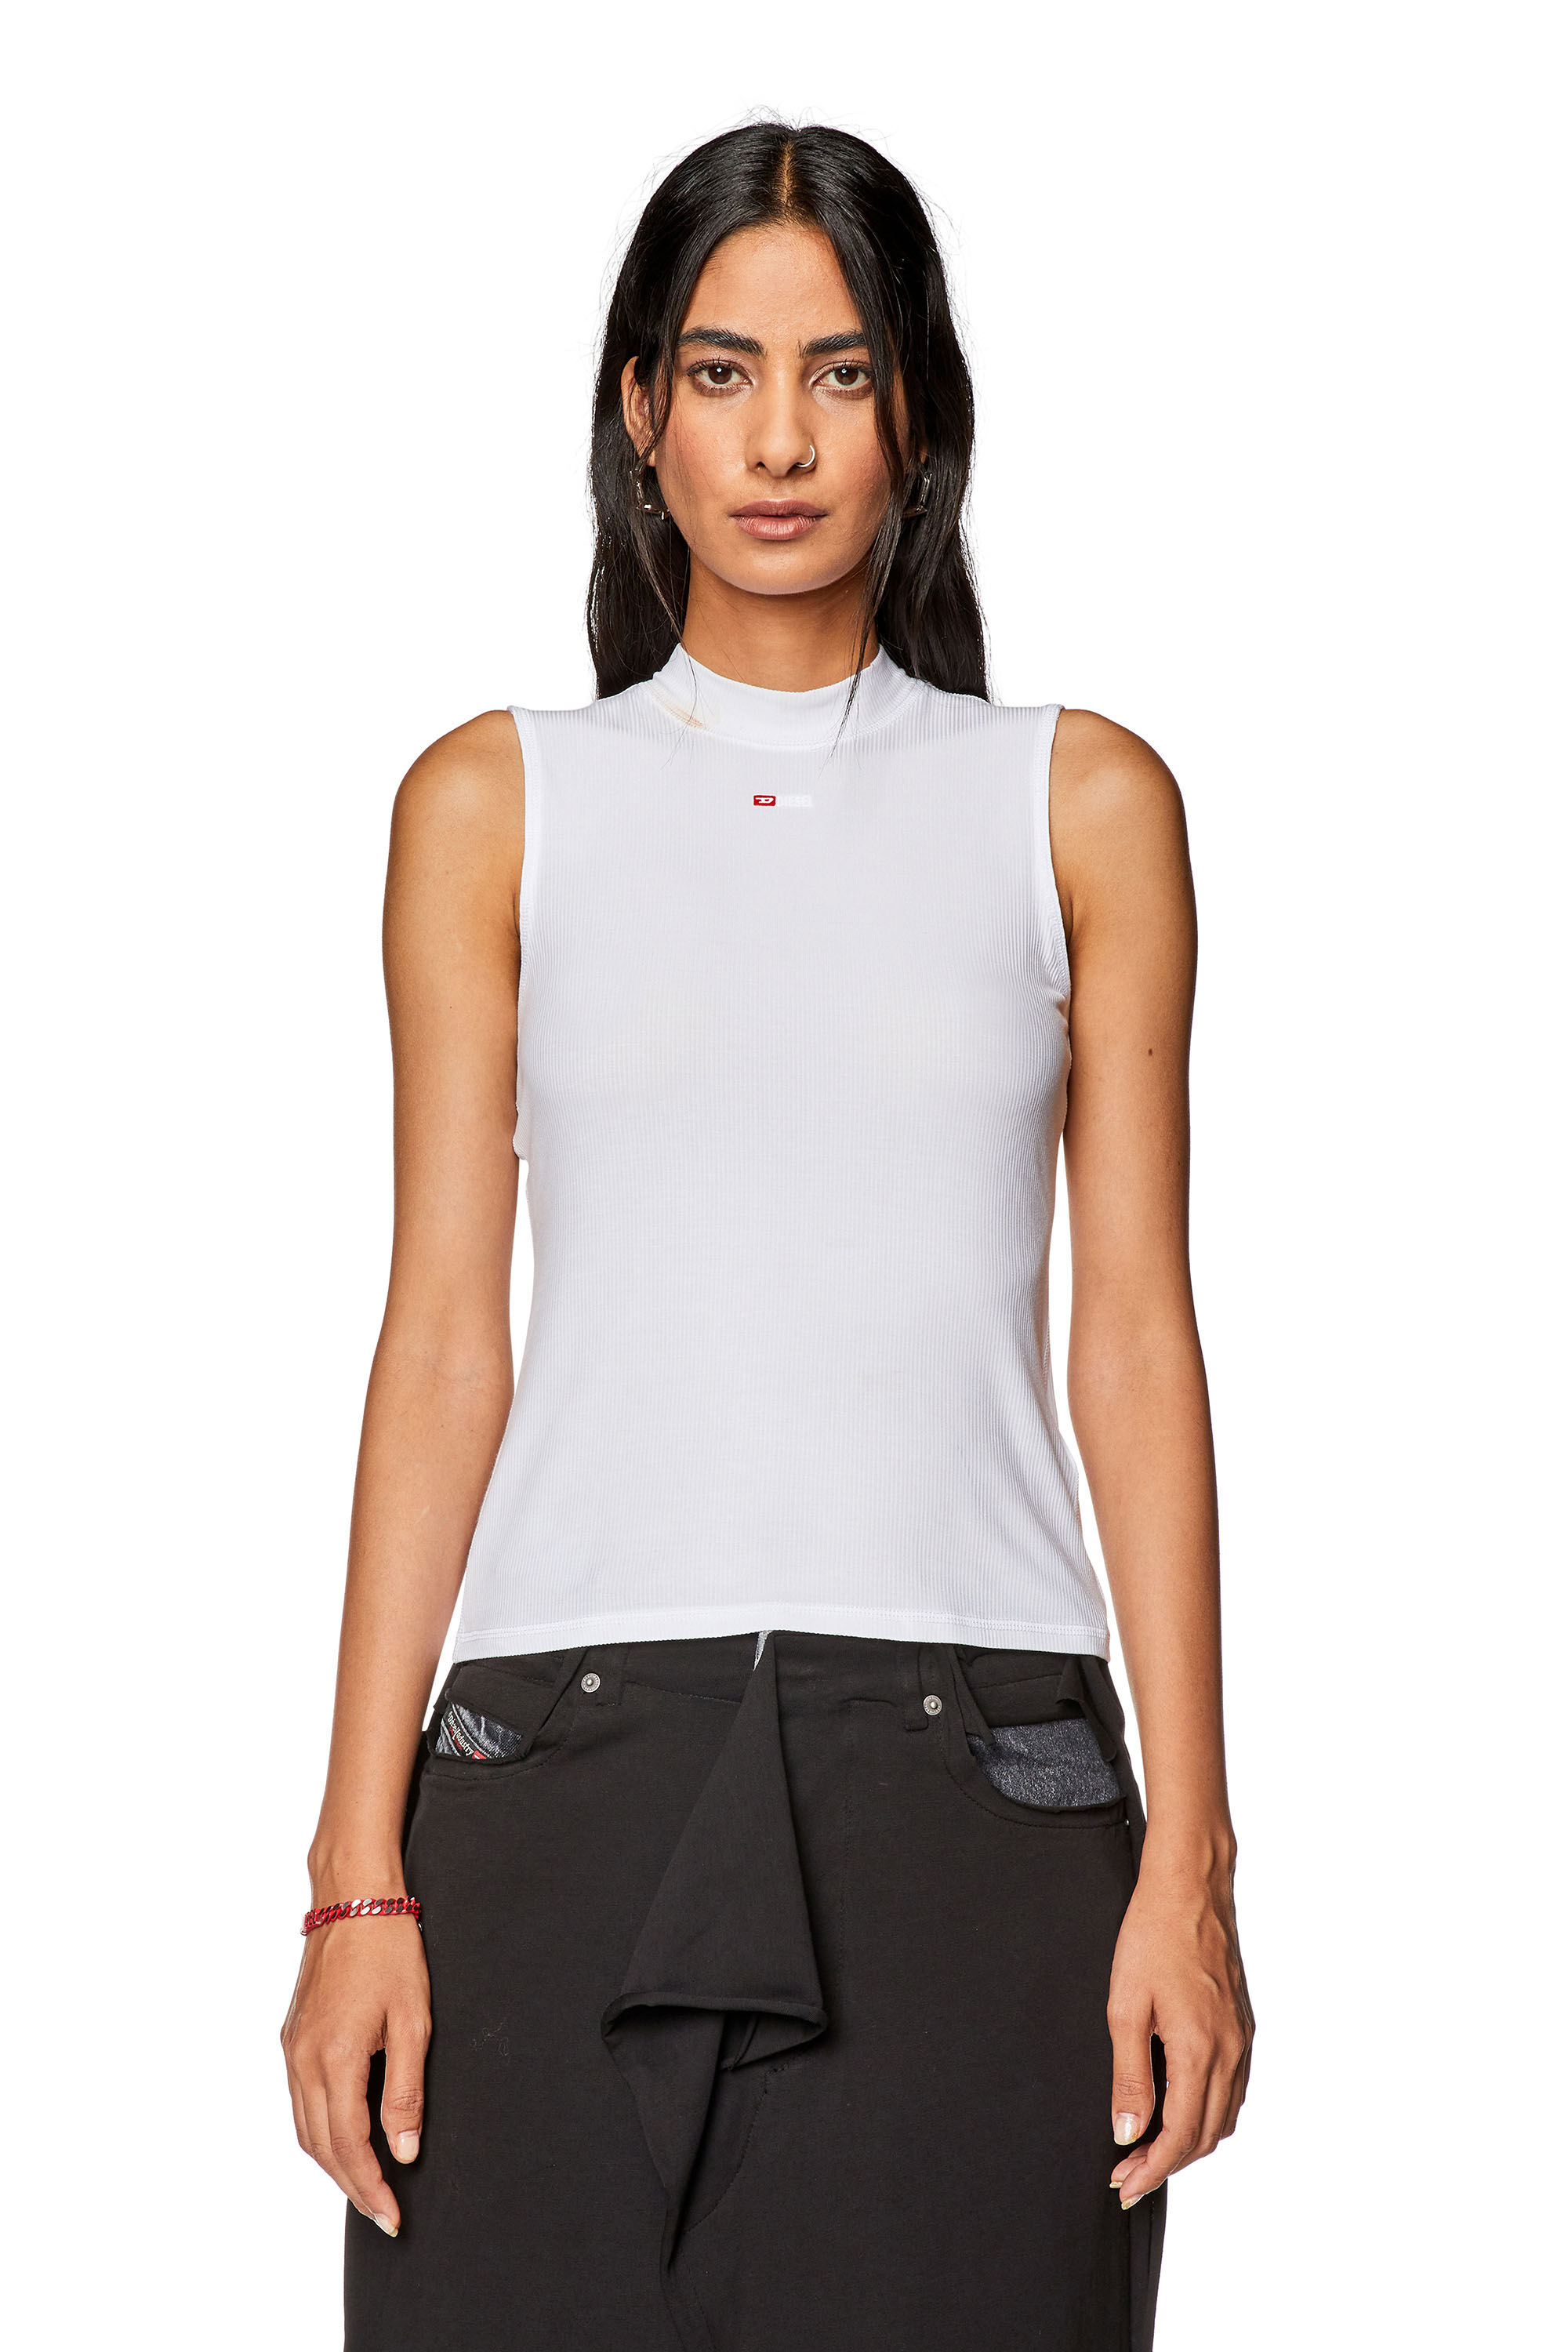 Women's Ribbed tank top with mock neck | White | Diesel